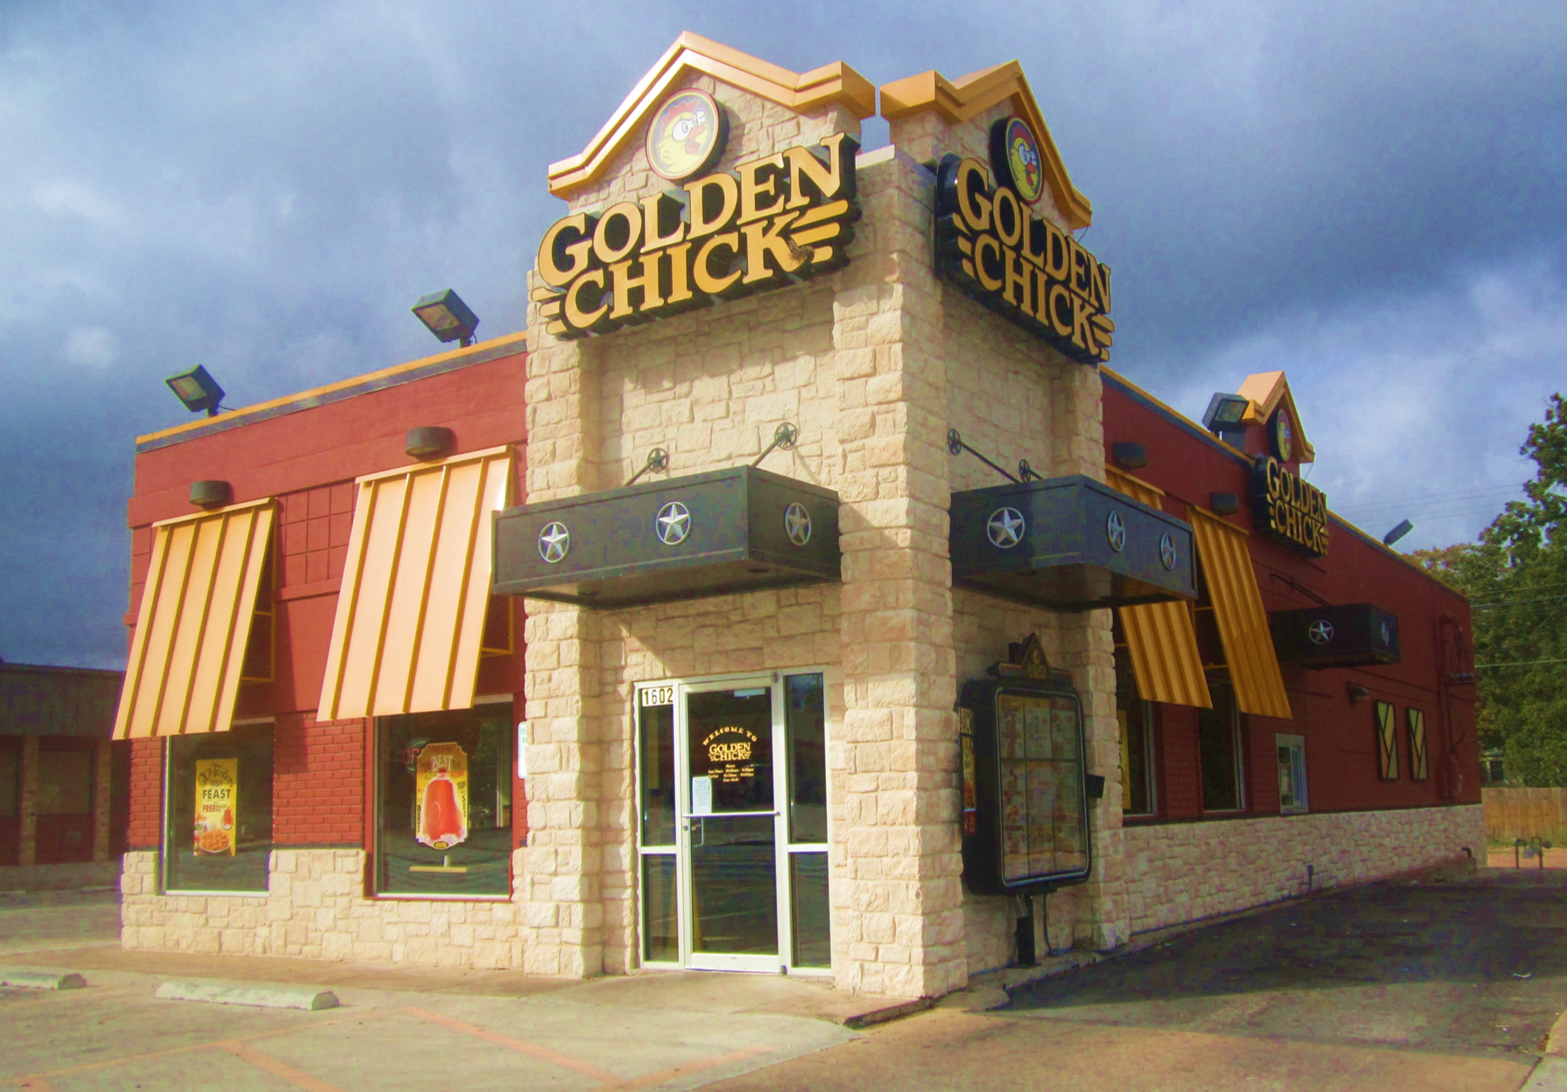 Golden Chick storefront.  Your local Golden Chick fast food restaurant in Brady, Texas